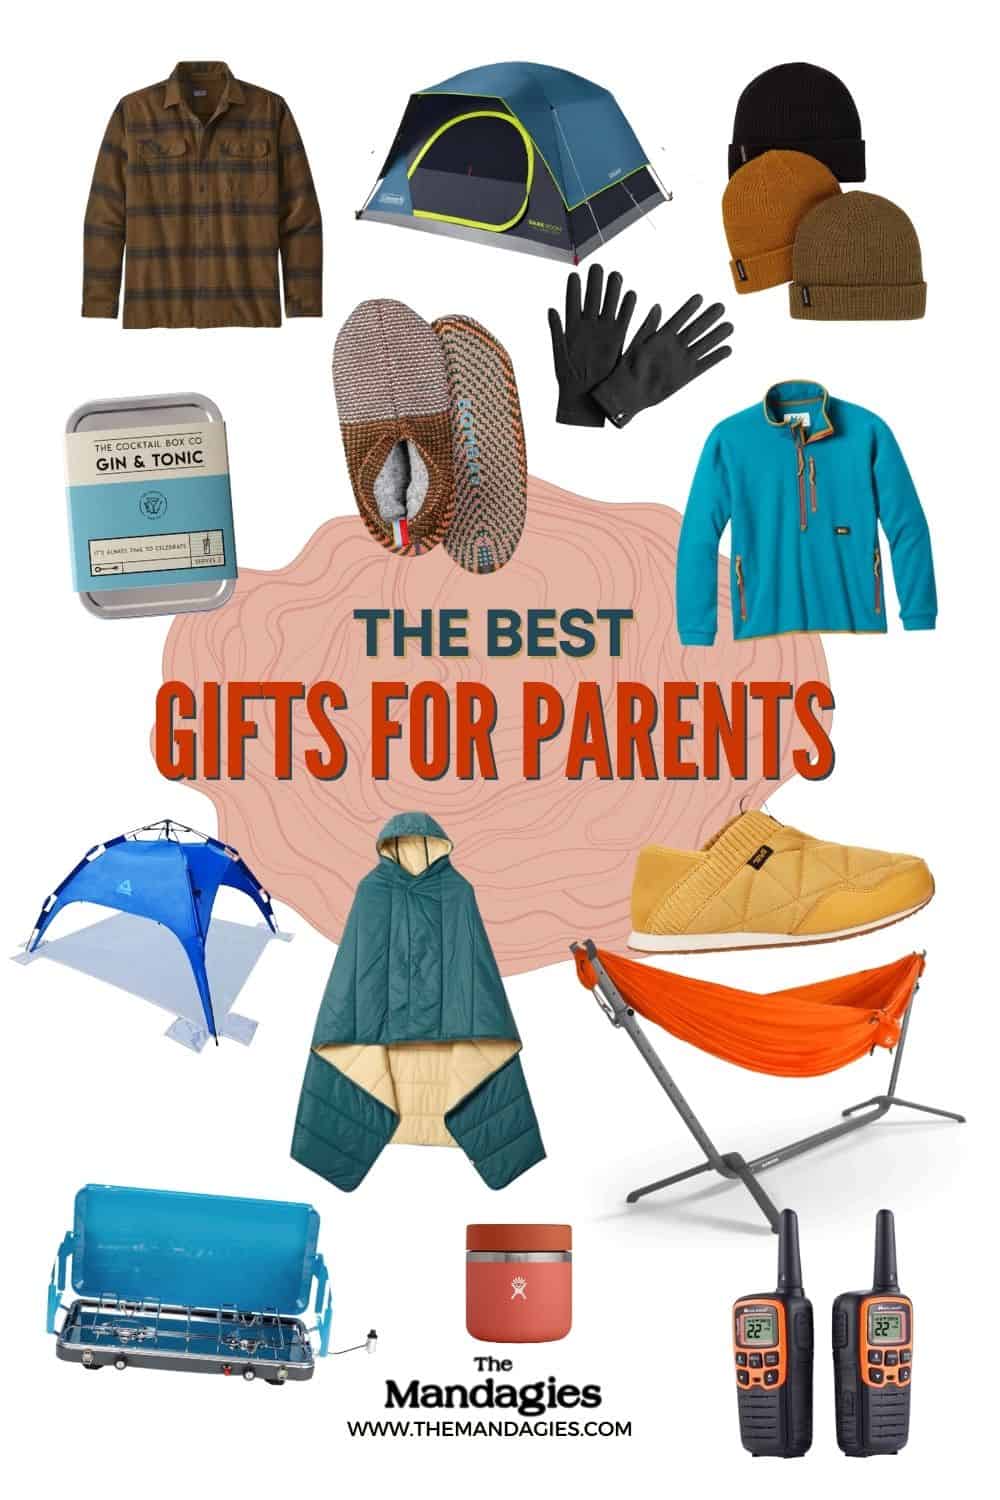 20 Awesome Outdoor Gifts Under $25 - The Mandagies